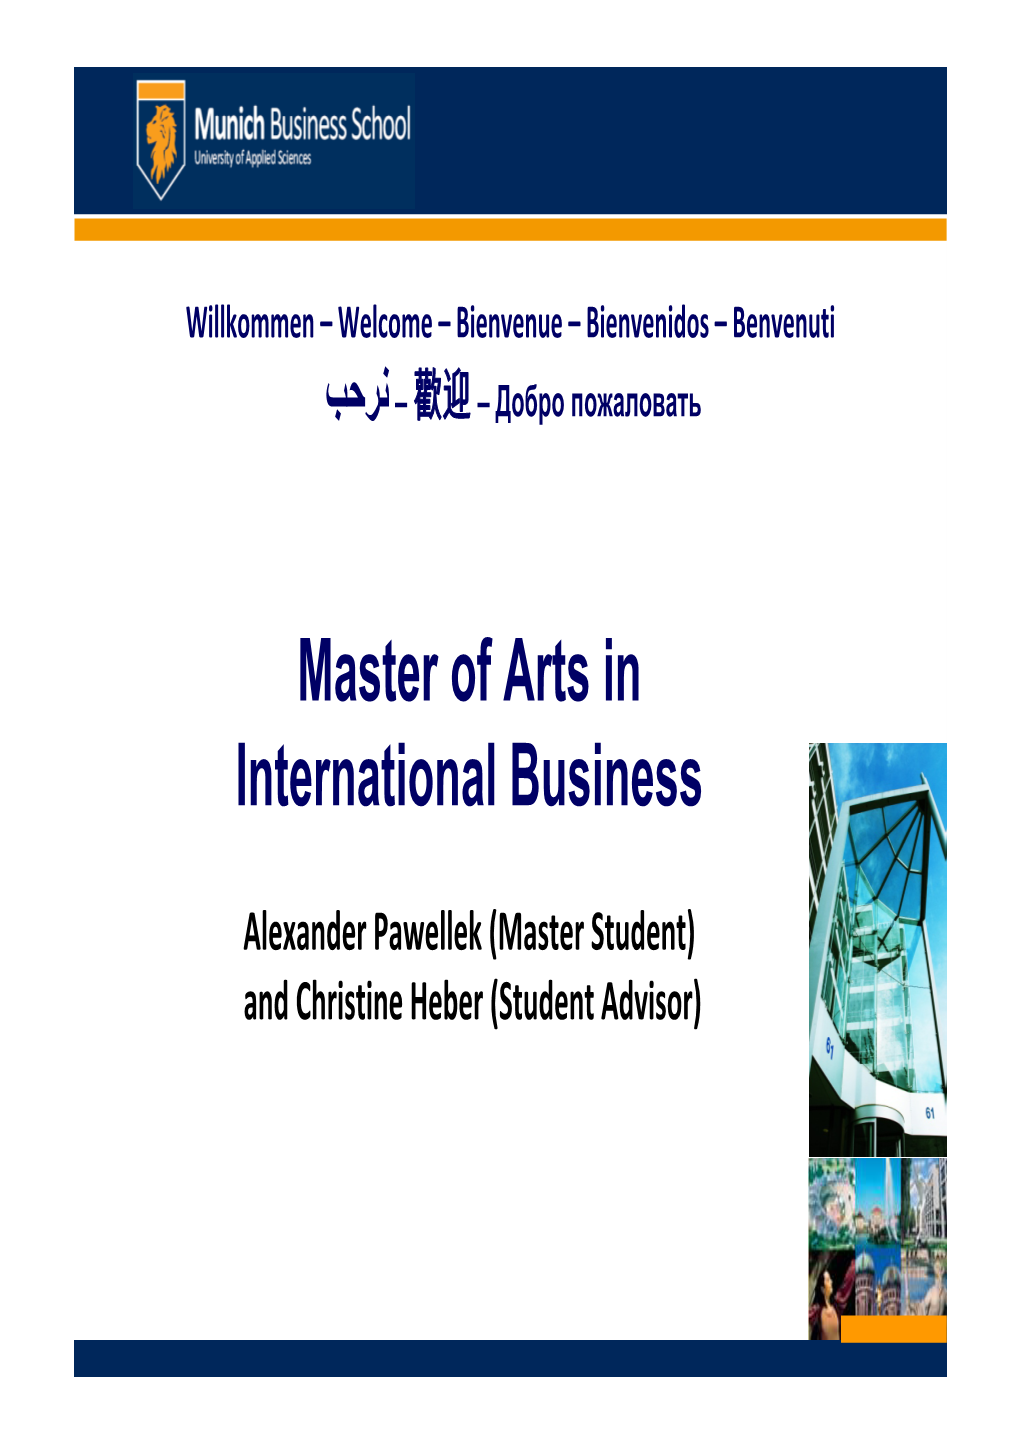 Master of Arts in International Business